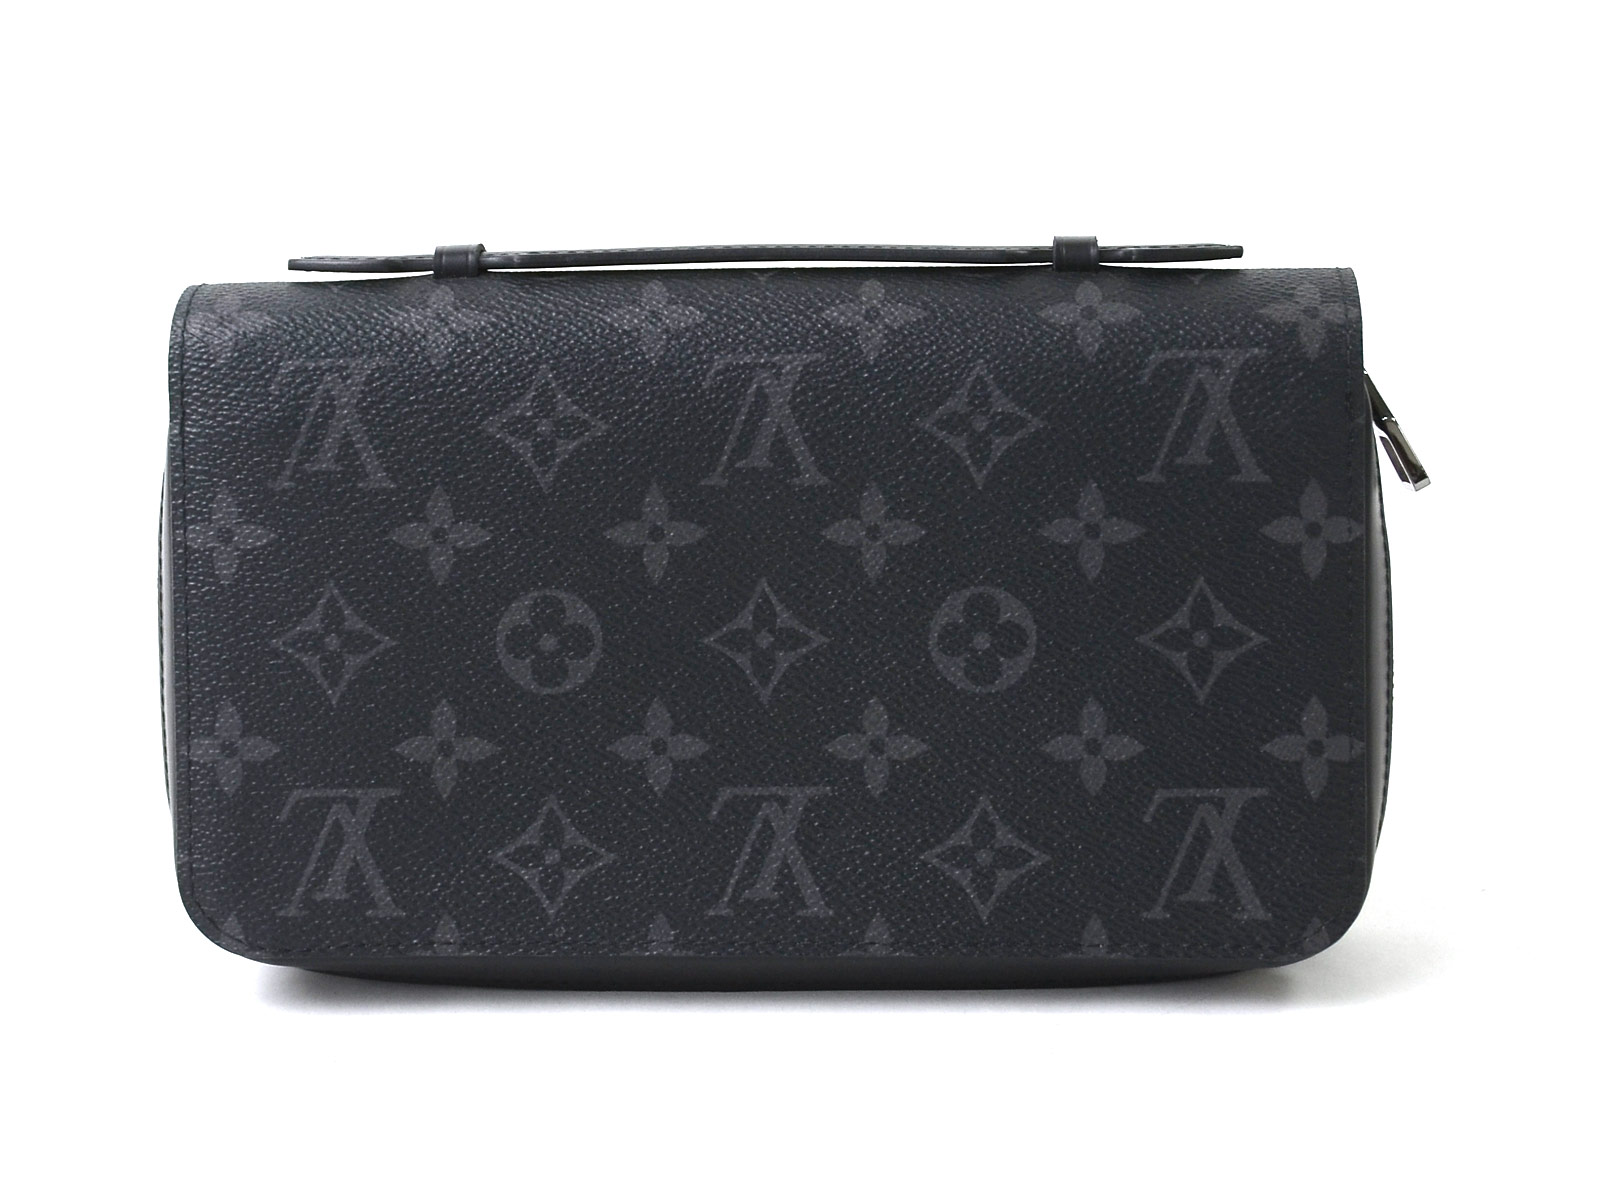 Louis Vuitton Xl Wallet Price In India | Confederated Tribes of the Umatilla Indian Reservation